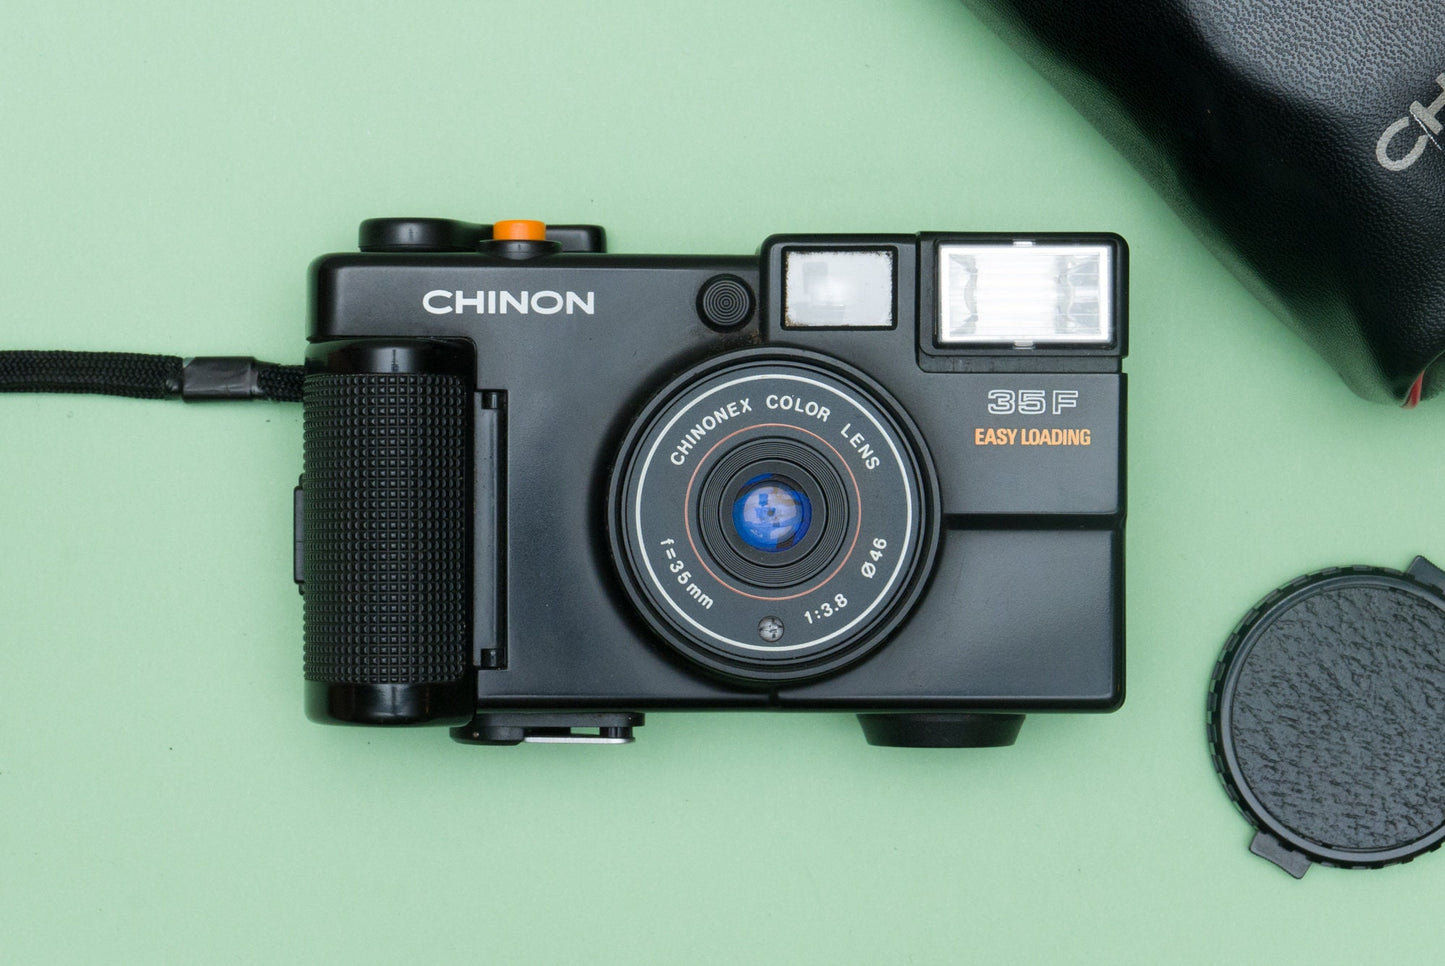 Chinon 35 F Compact 35mm Point and Shoot Film Camera